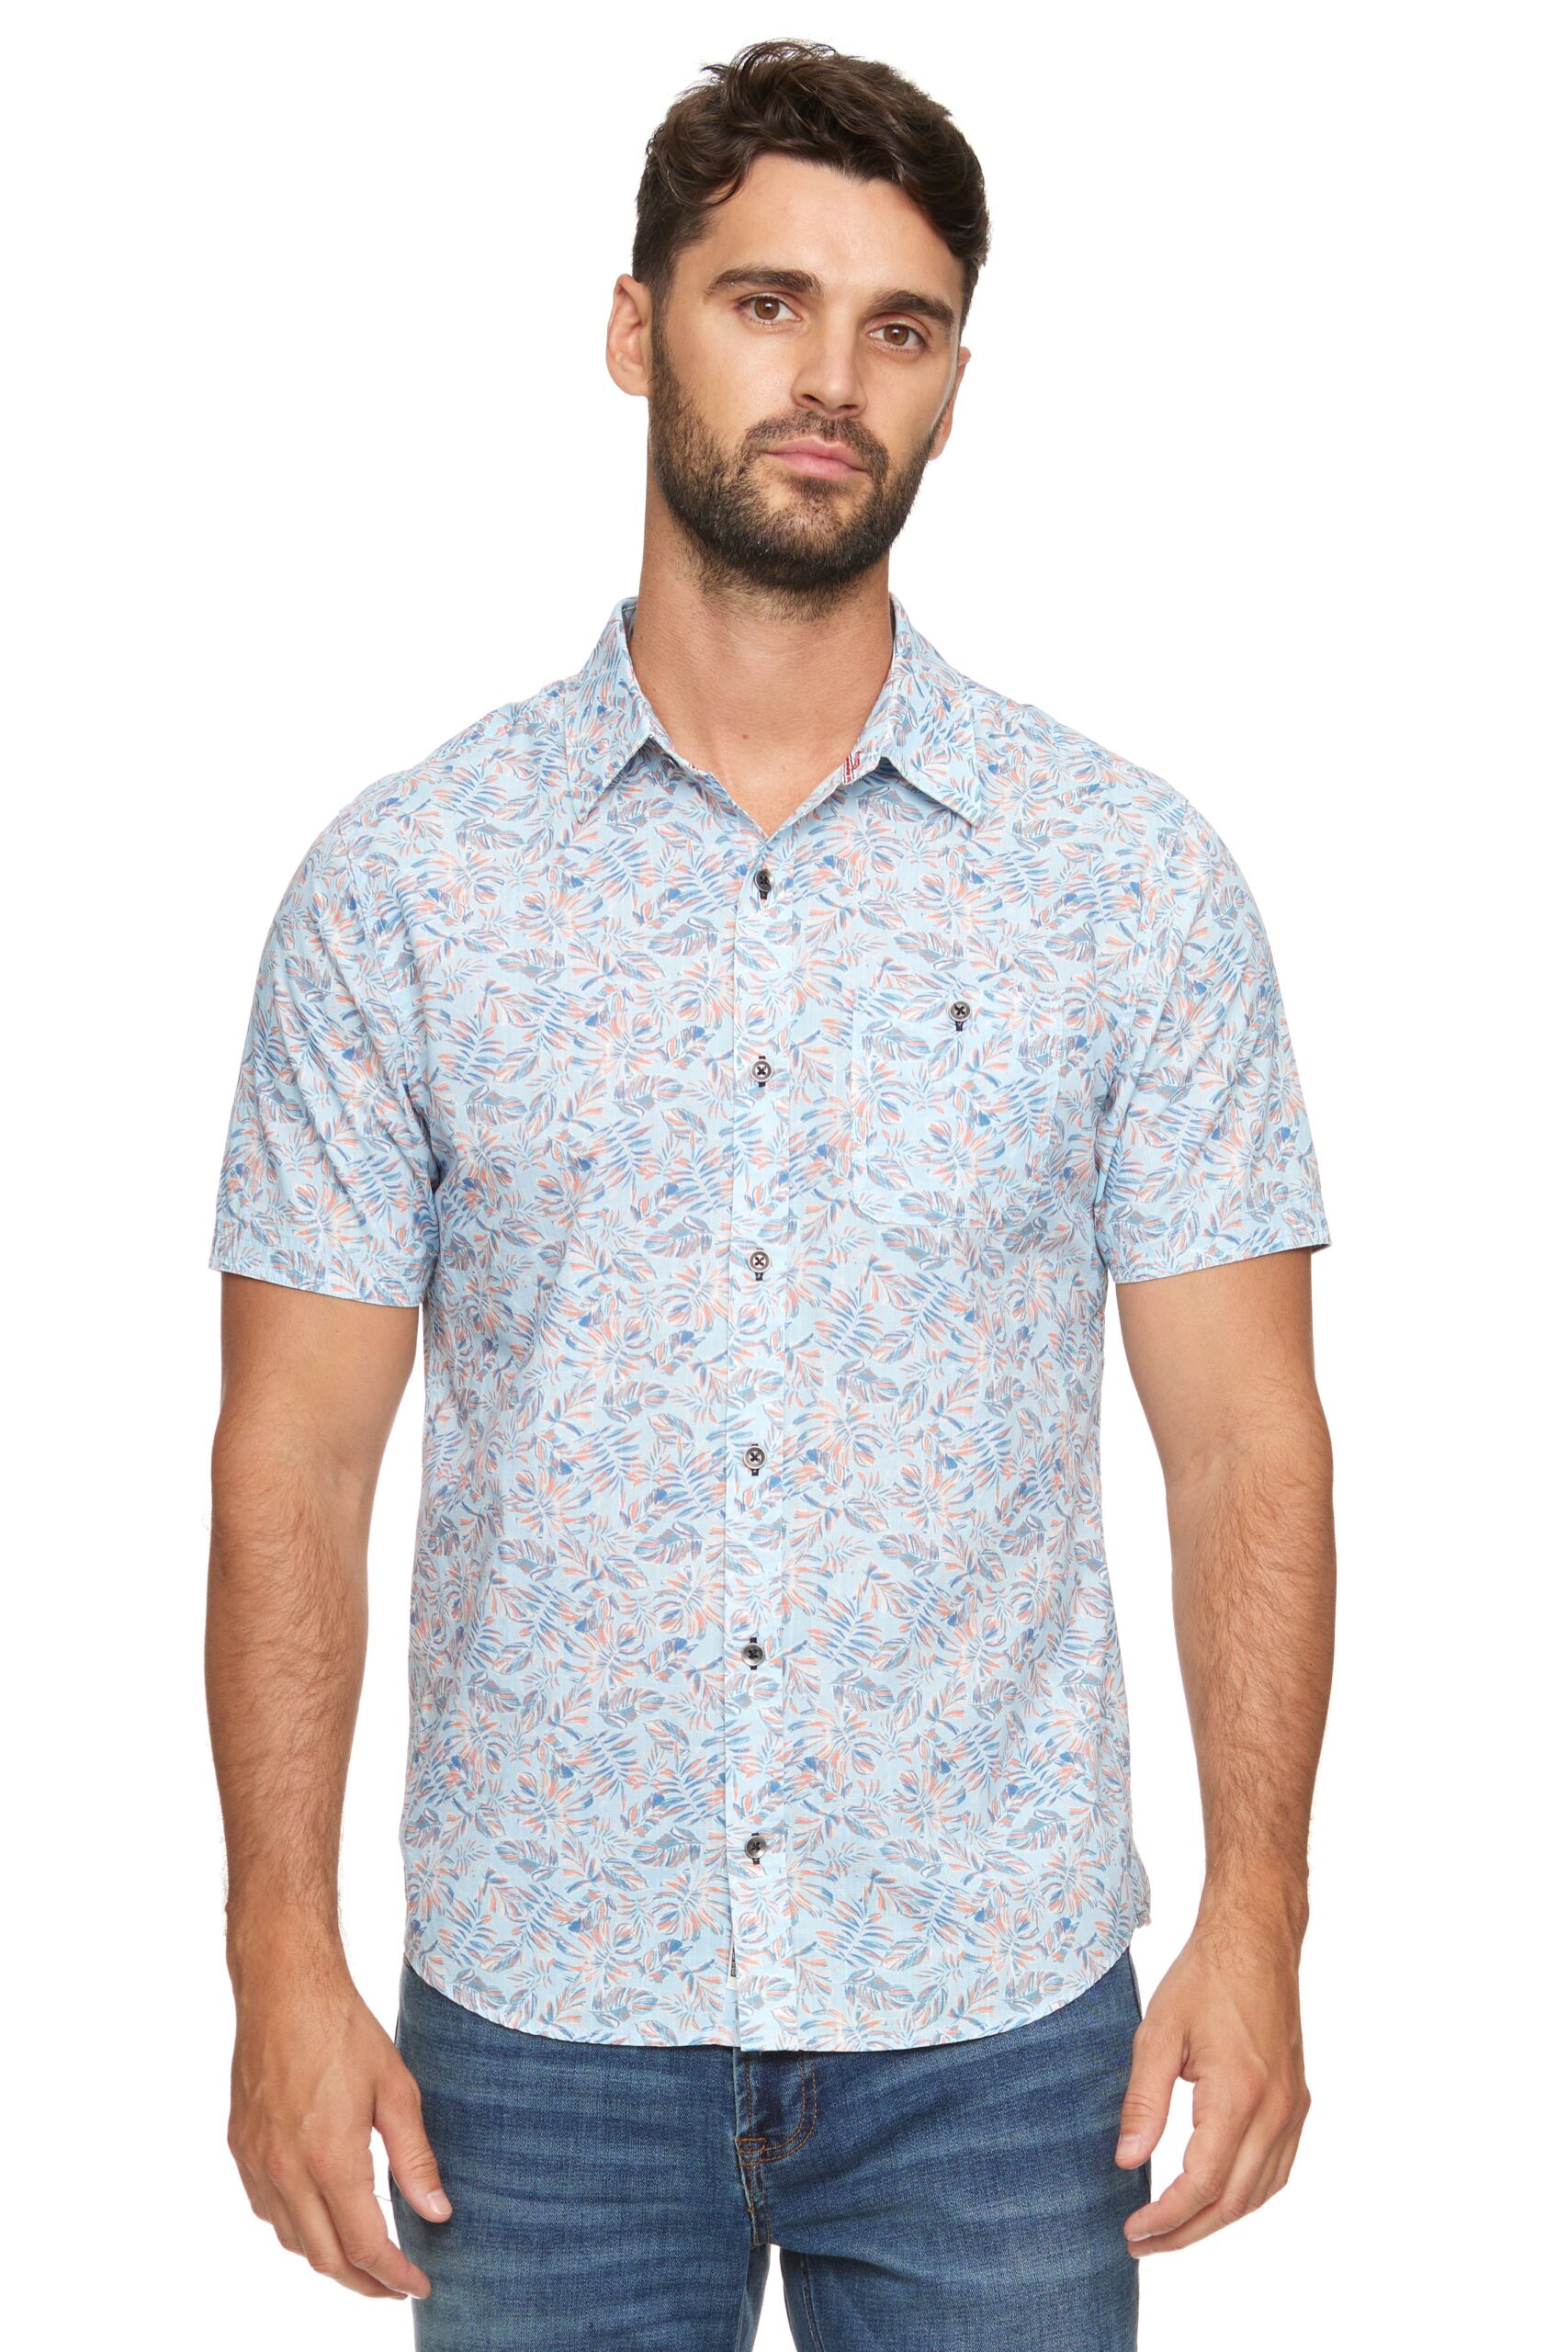 Kissimee Short Sleeve Palm Printed Button Up - Frontier Justice